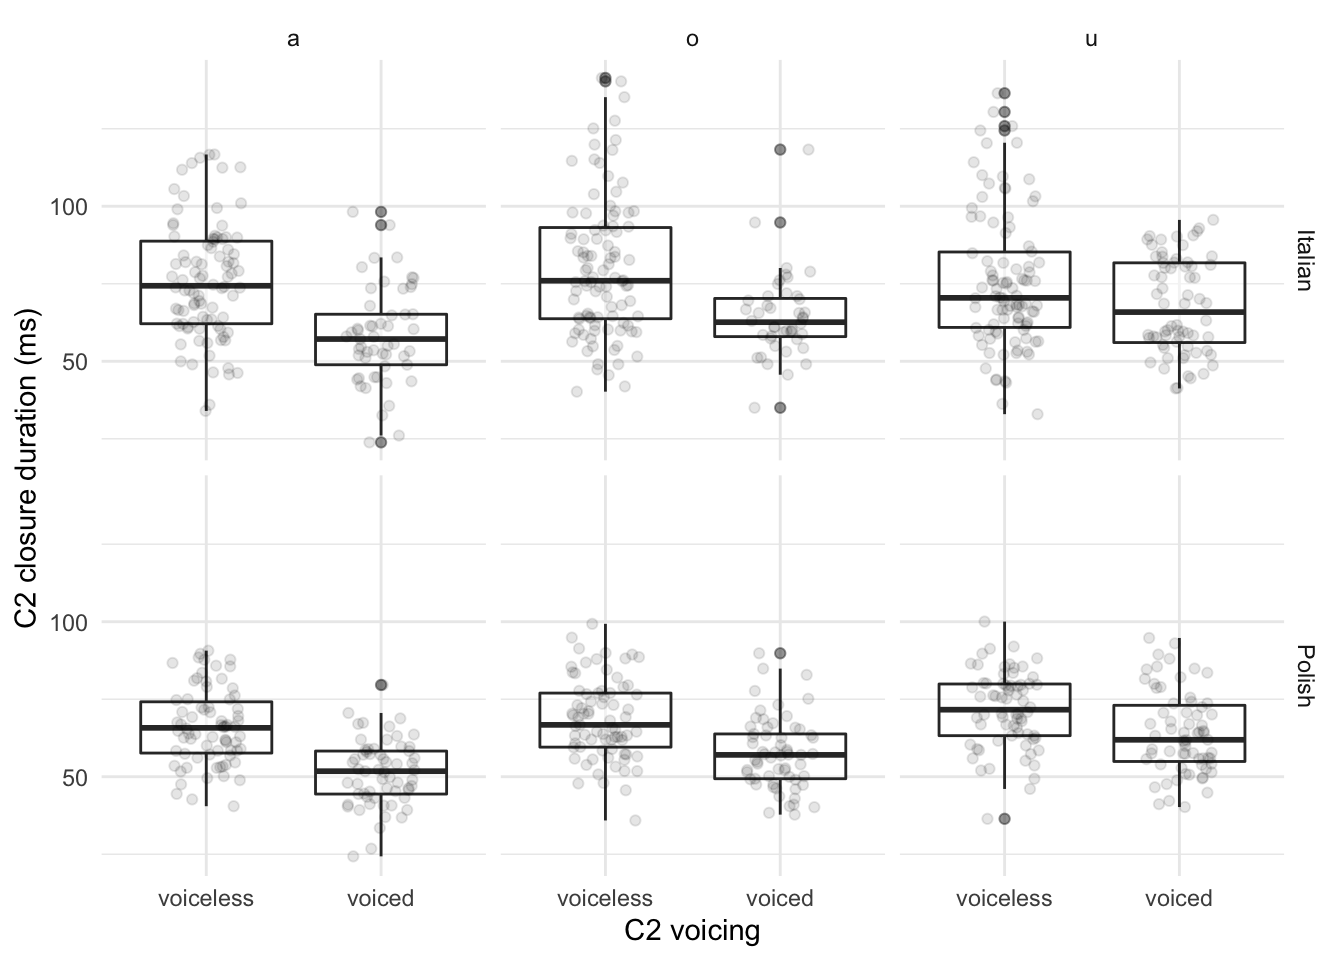 Raw data and boxplots of closure duration in milliseconds of voiceless and voiced stops in Italian (top row) and Polish (bottom row) when preceded by the vowels /a, o, u/.